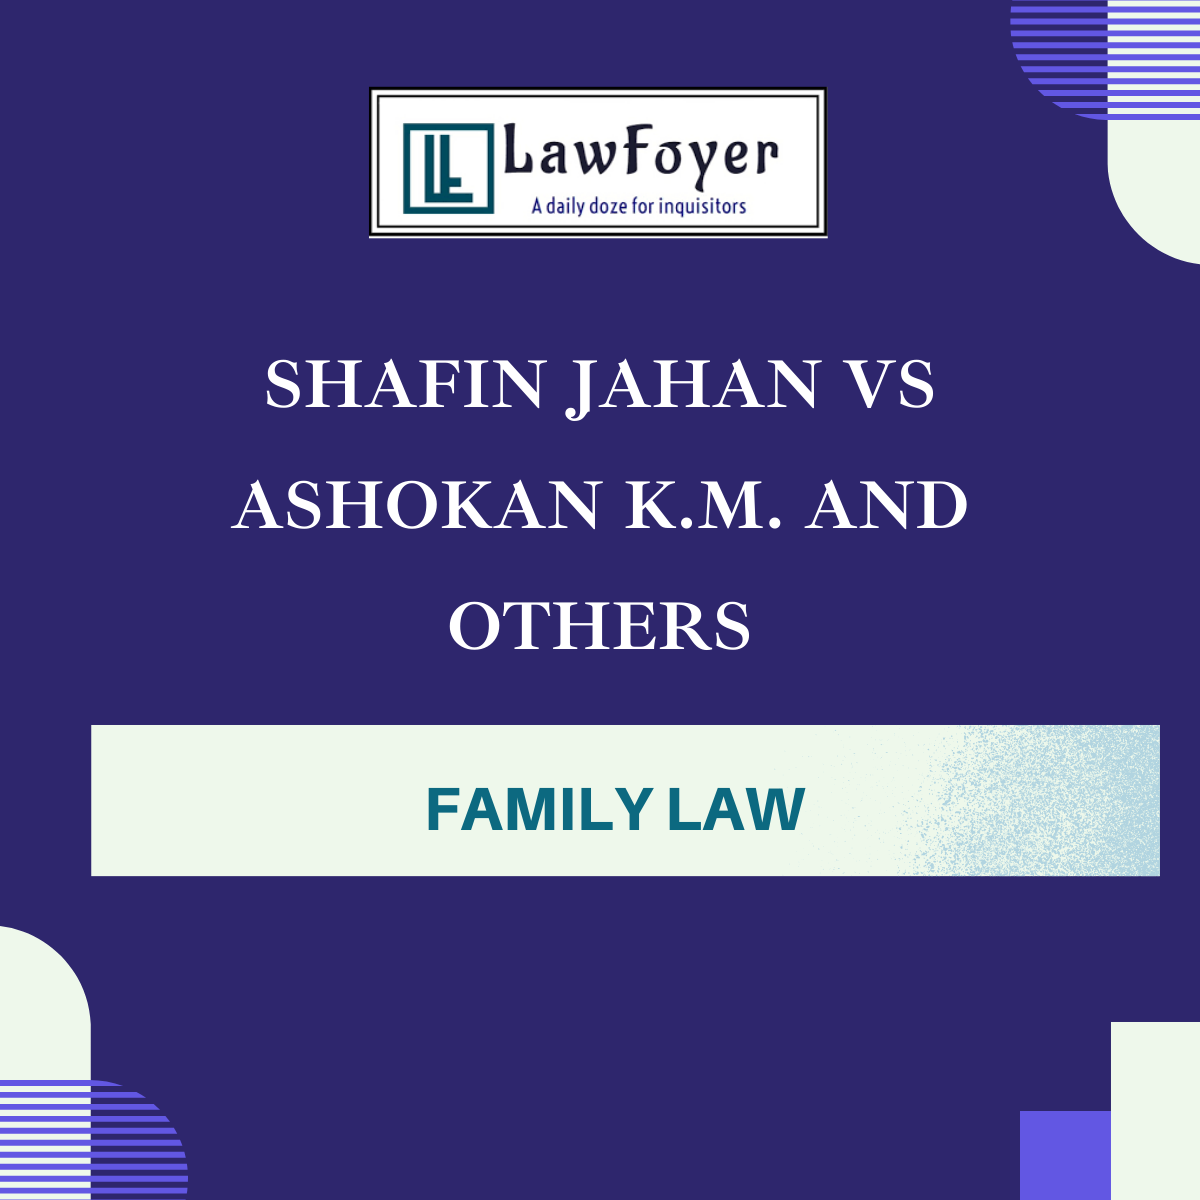 Read more about the article SHAFIN JAHAN VS ASHOKAN K.M. AND OTHERS